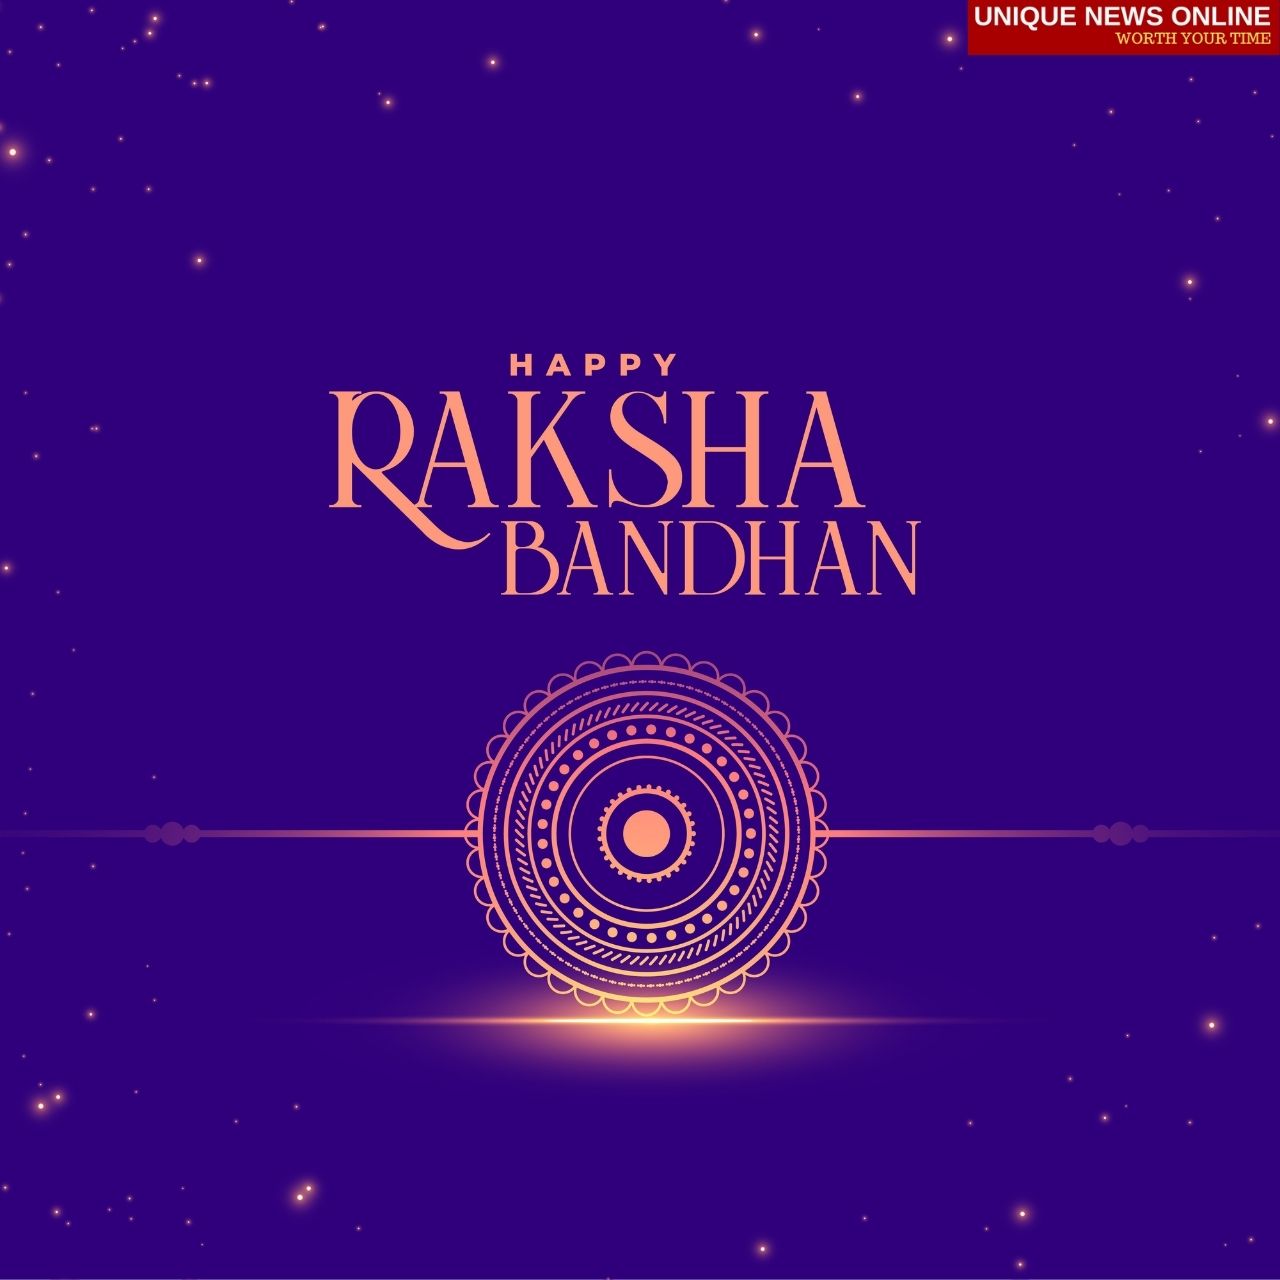 Happy Raksha Bandhan 2021: 60+ Best Wishes, Messages, Quotes, and HD Images to greet your Friends and Relatives